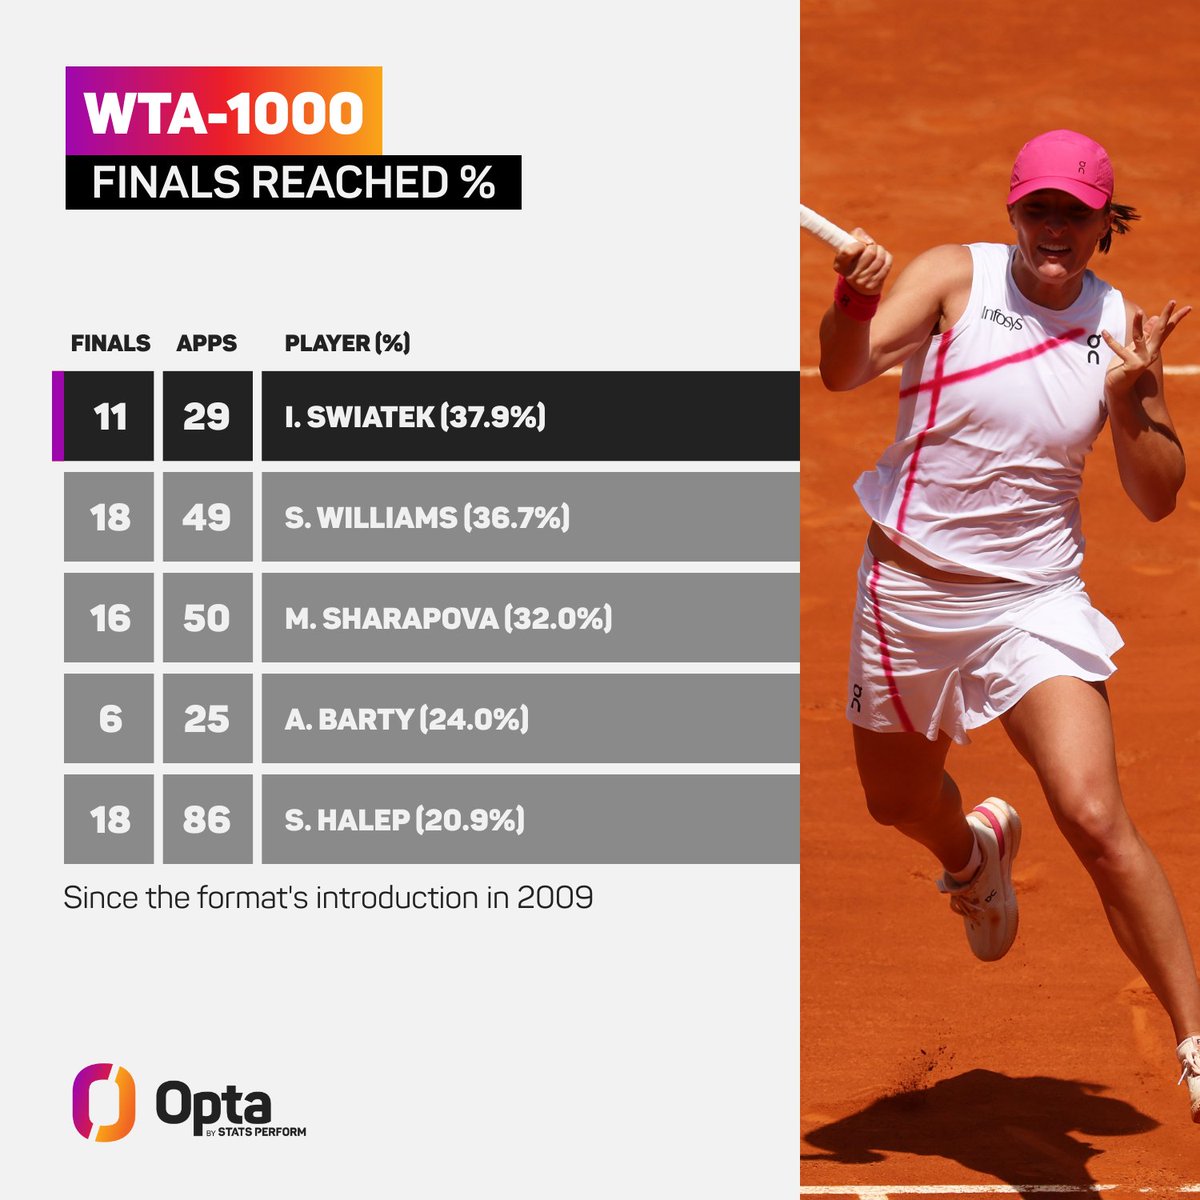 37.9% - Iga Swiatek (37.9%, 11/29) has surpassed Serena Williams (36.7%, 18/49) for the highest percentage of finals reached from WTA-1000 main draws entered, since the format’s introduction in 2009. Decree. #MMOPEN | @MutuaMadridOpen @WTA @WTA_insider